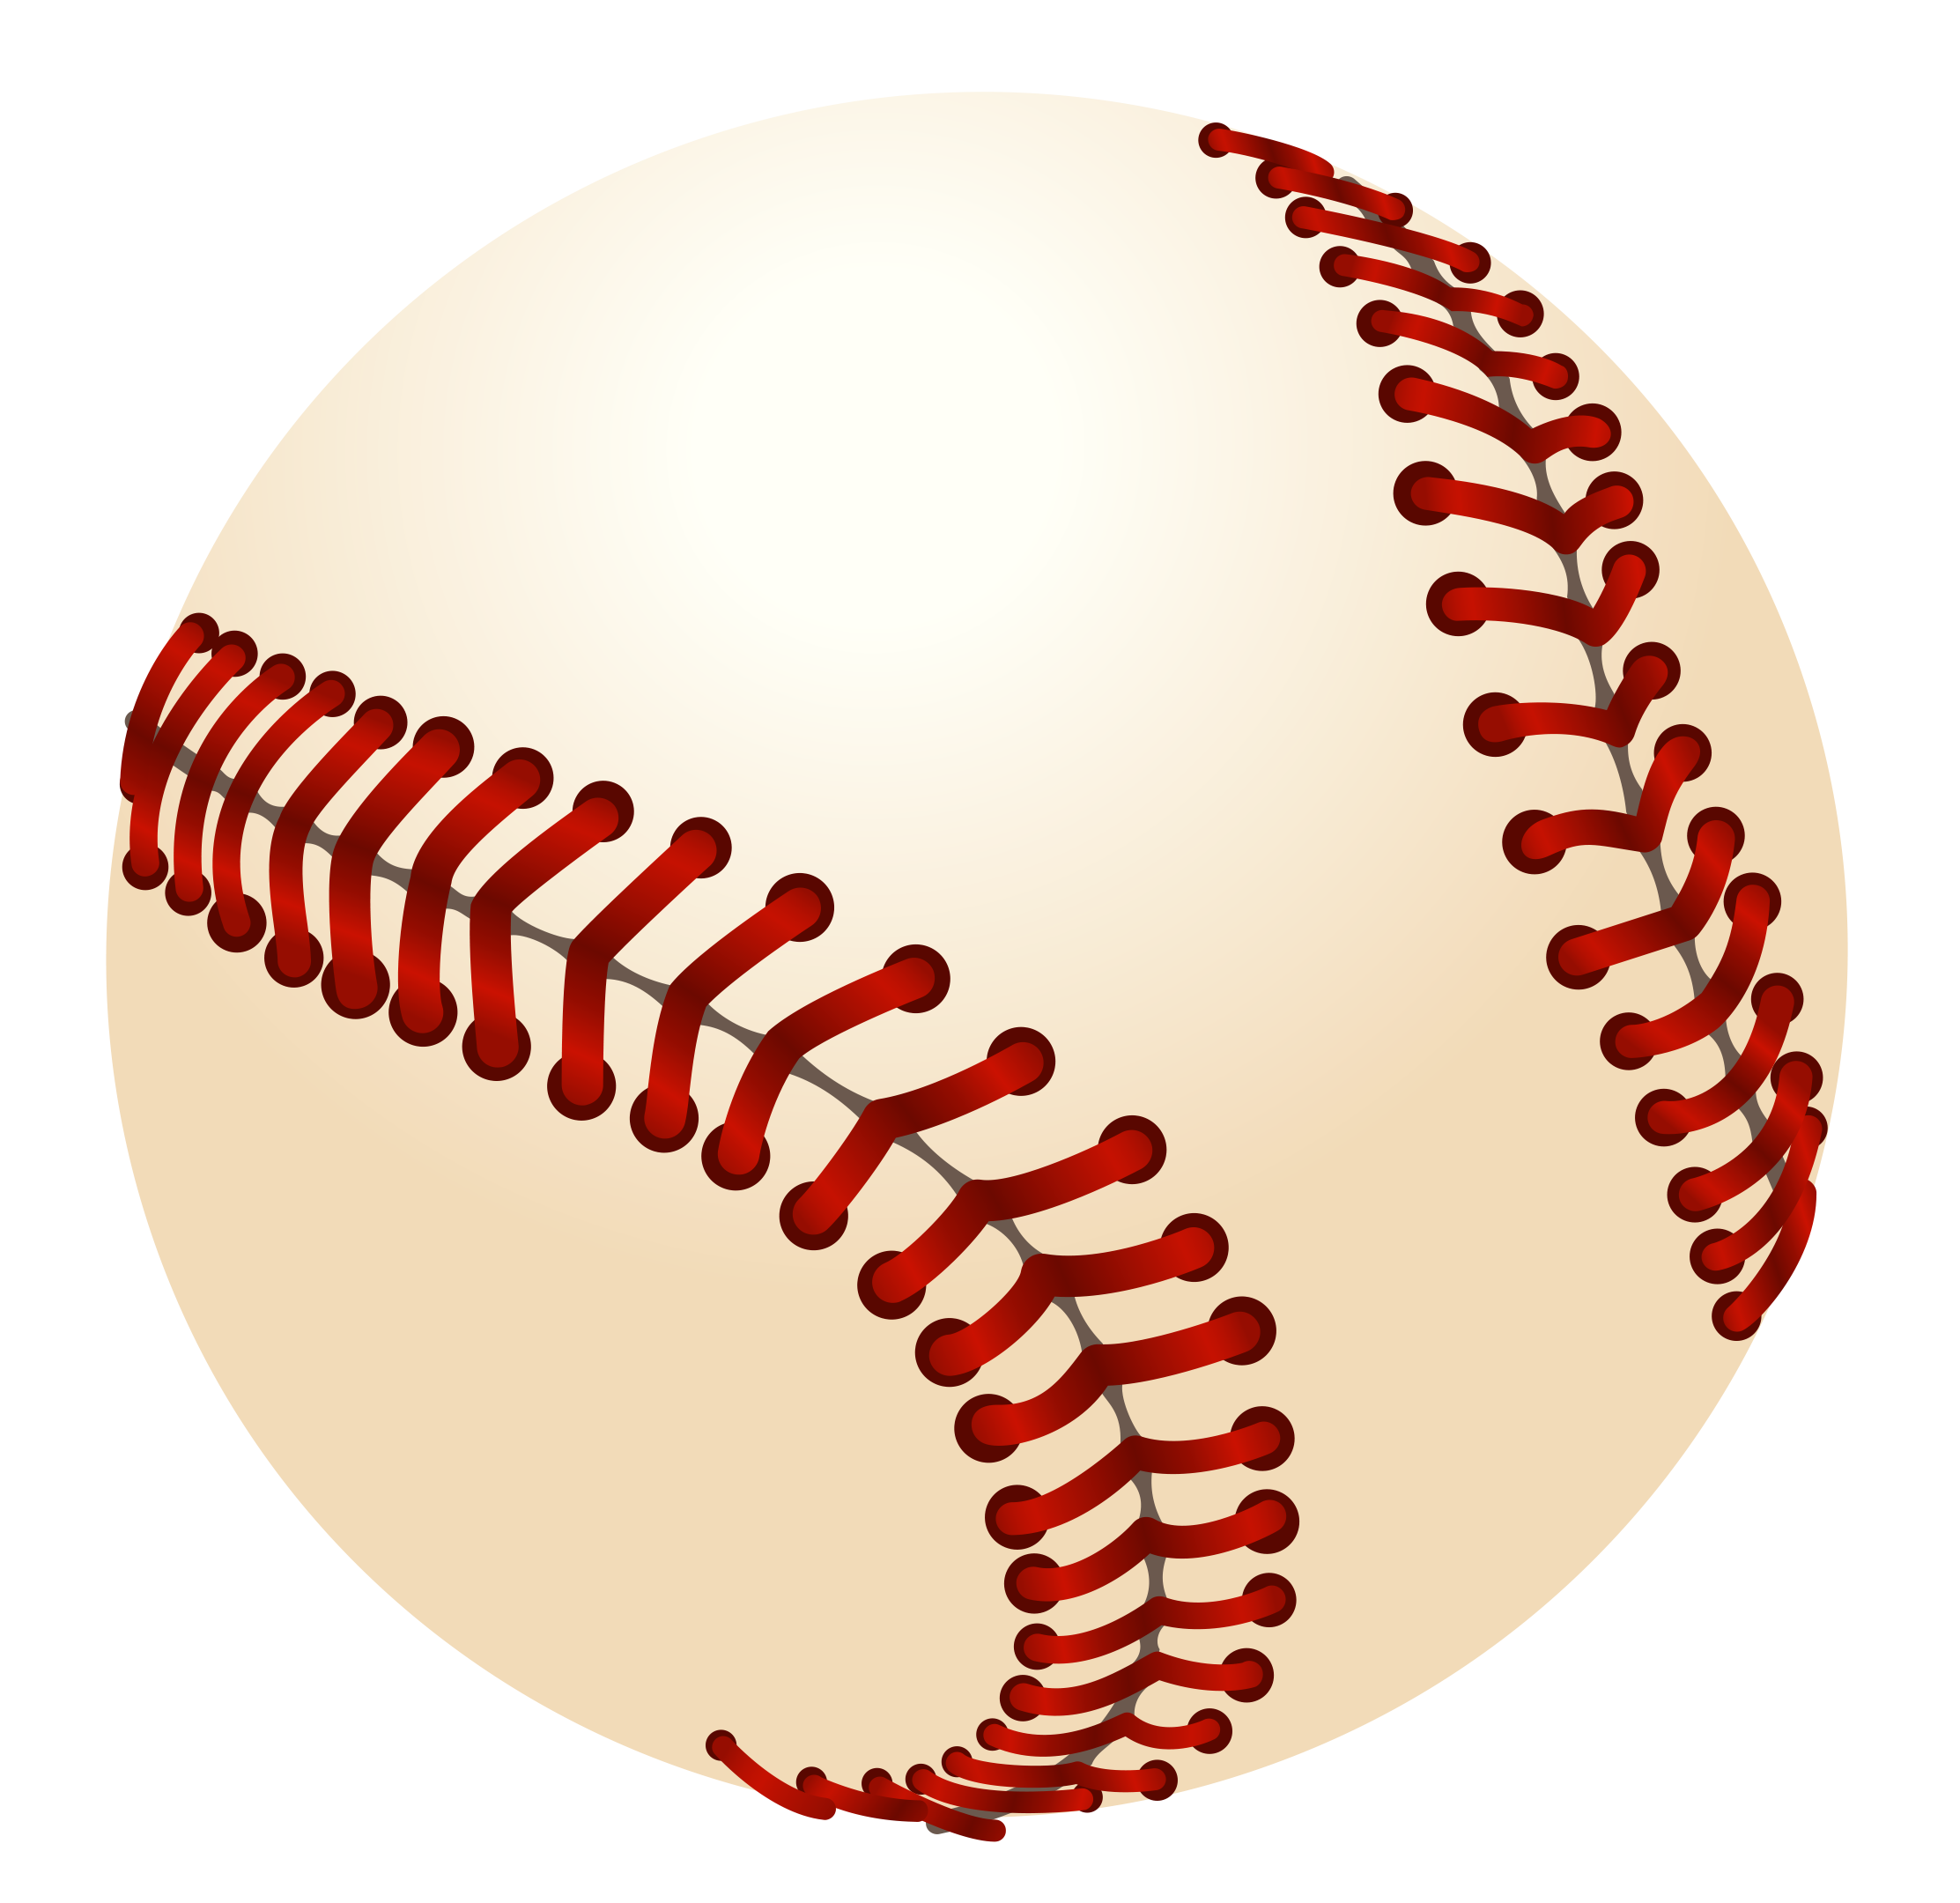 Baseball Ball PNG Clipart Picture